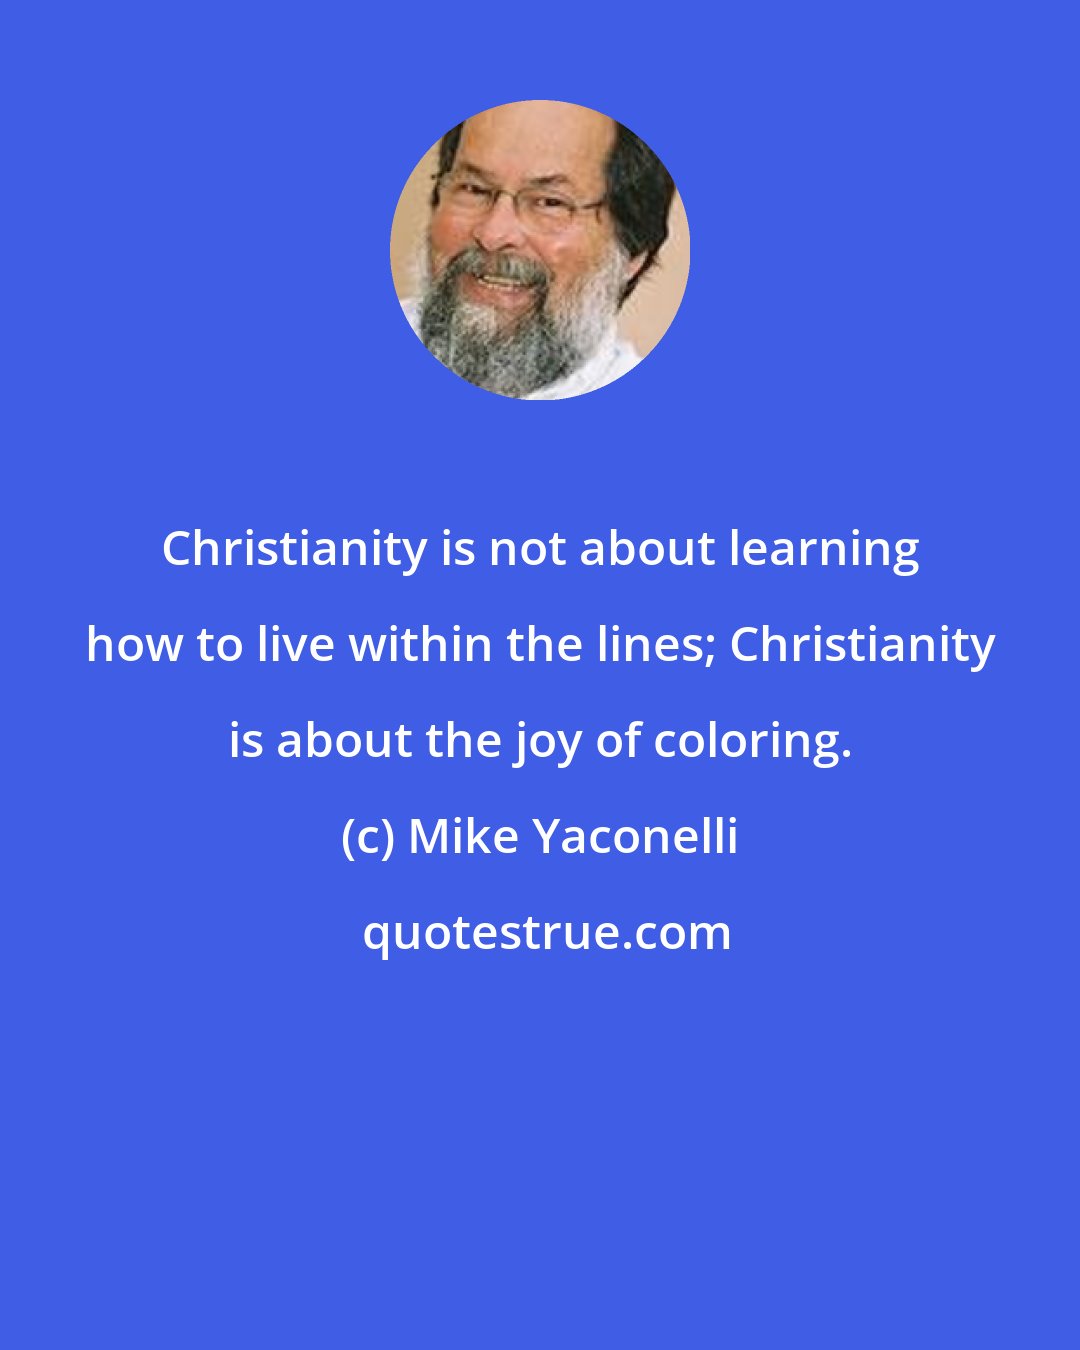 Mike Yaconelli: Christianity is not about learning how to live within the lines; Christianity is about the joy of coloring.